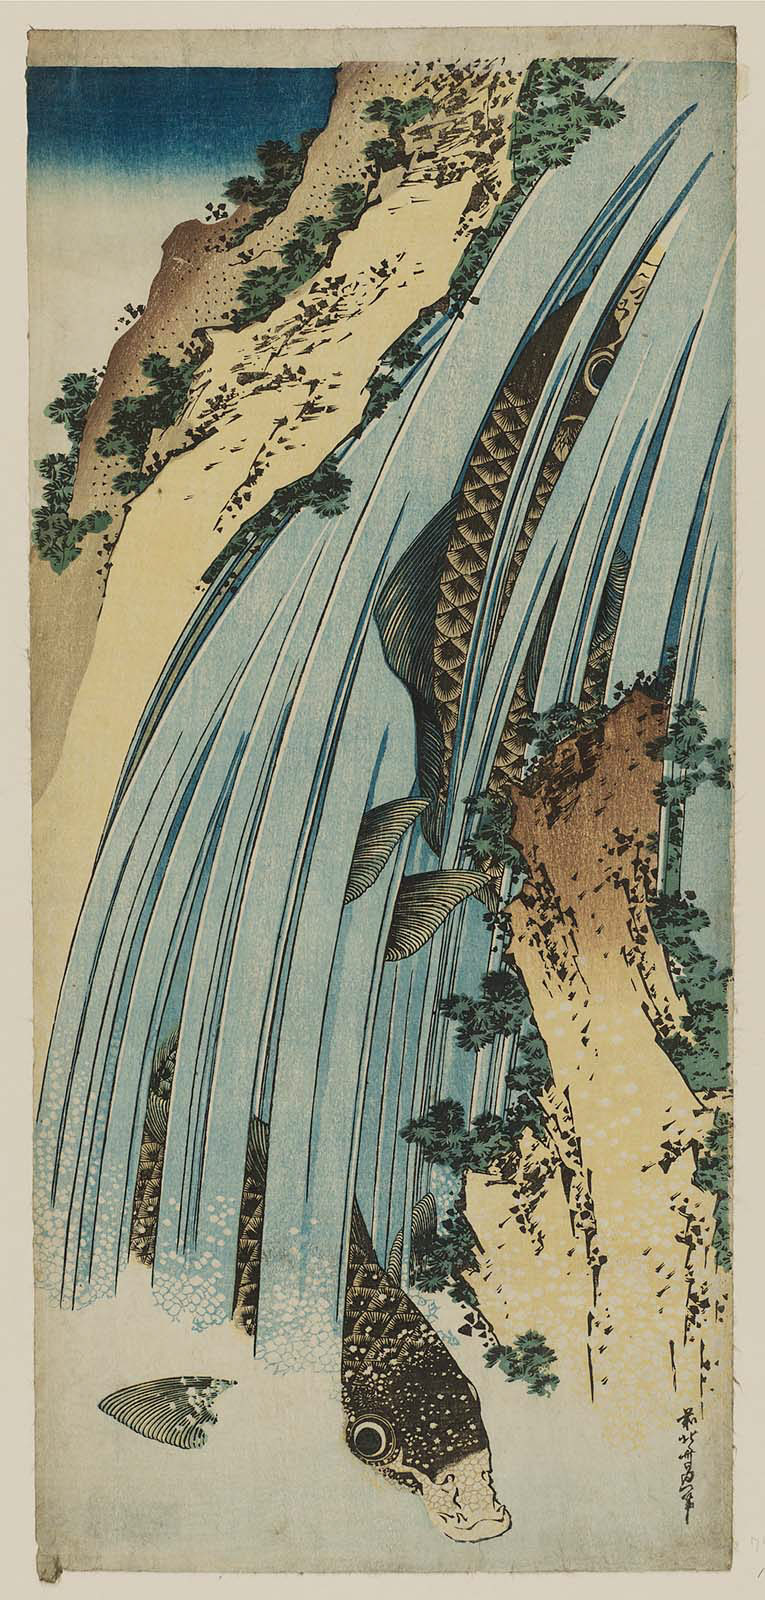 Hokusai - Two Carp in Waterfall - Large Images of Nature